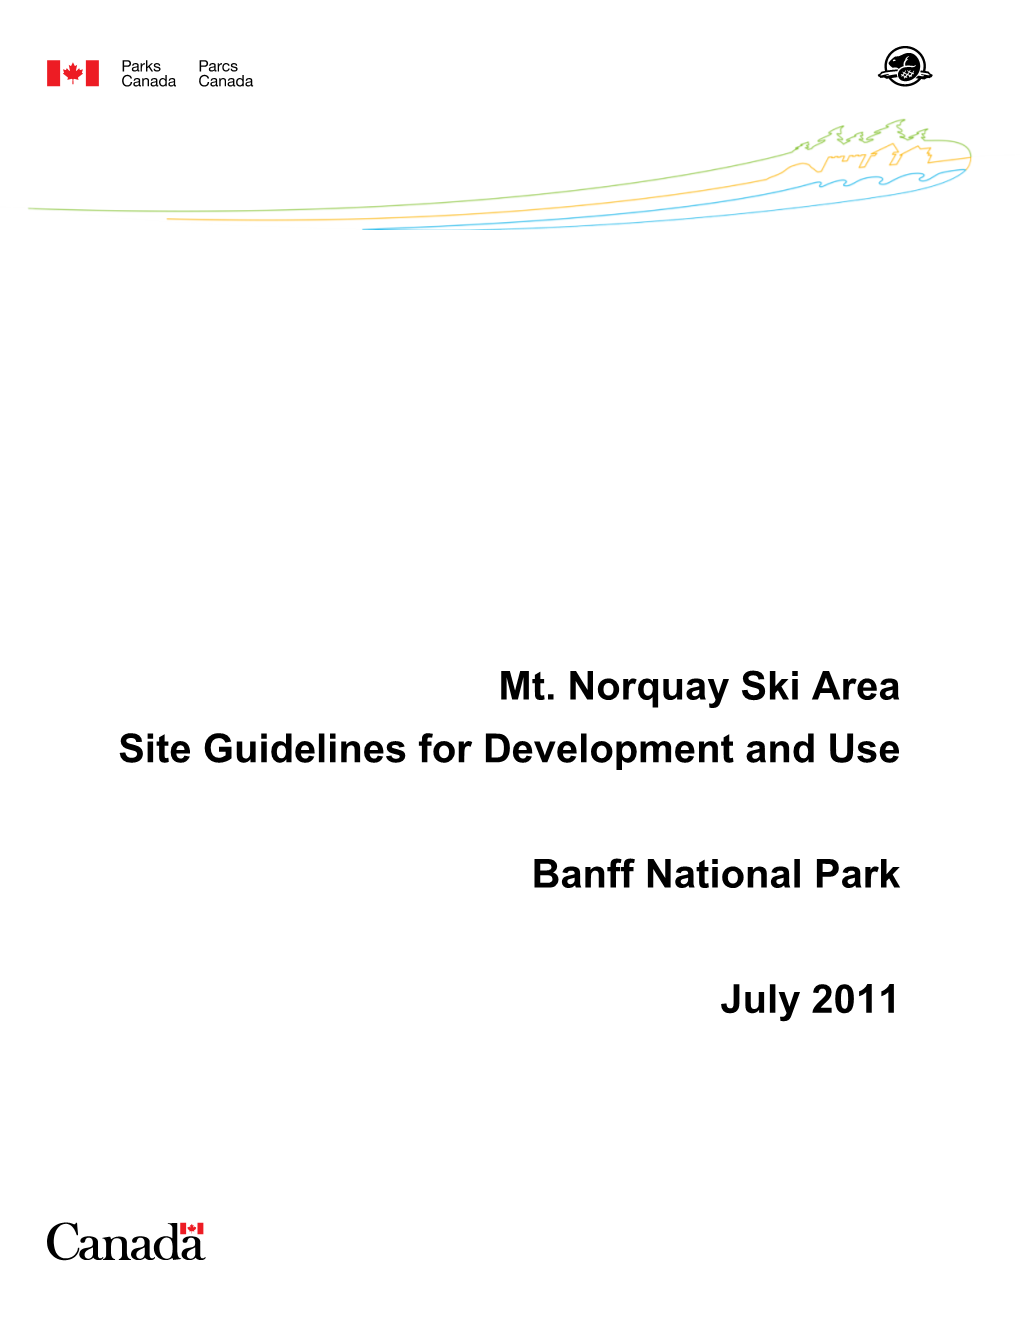 Mt. Norquay Ski Area Site Guidelines for Development and Use Banff